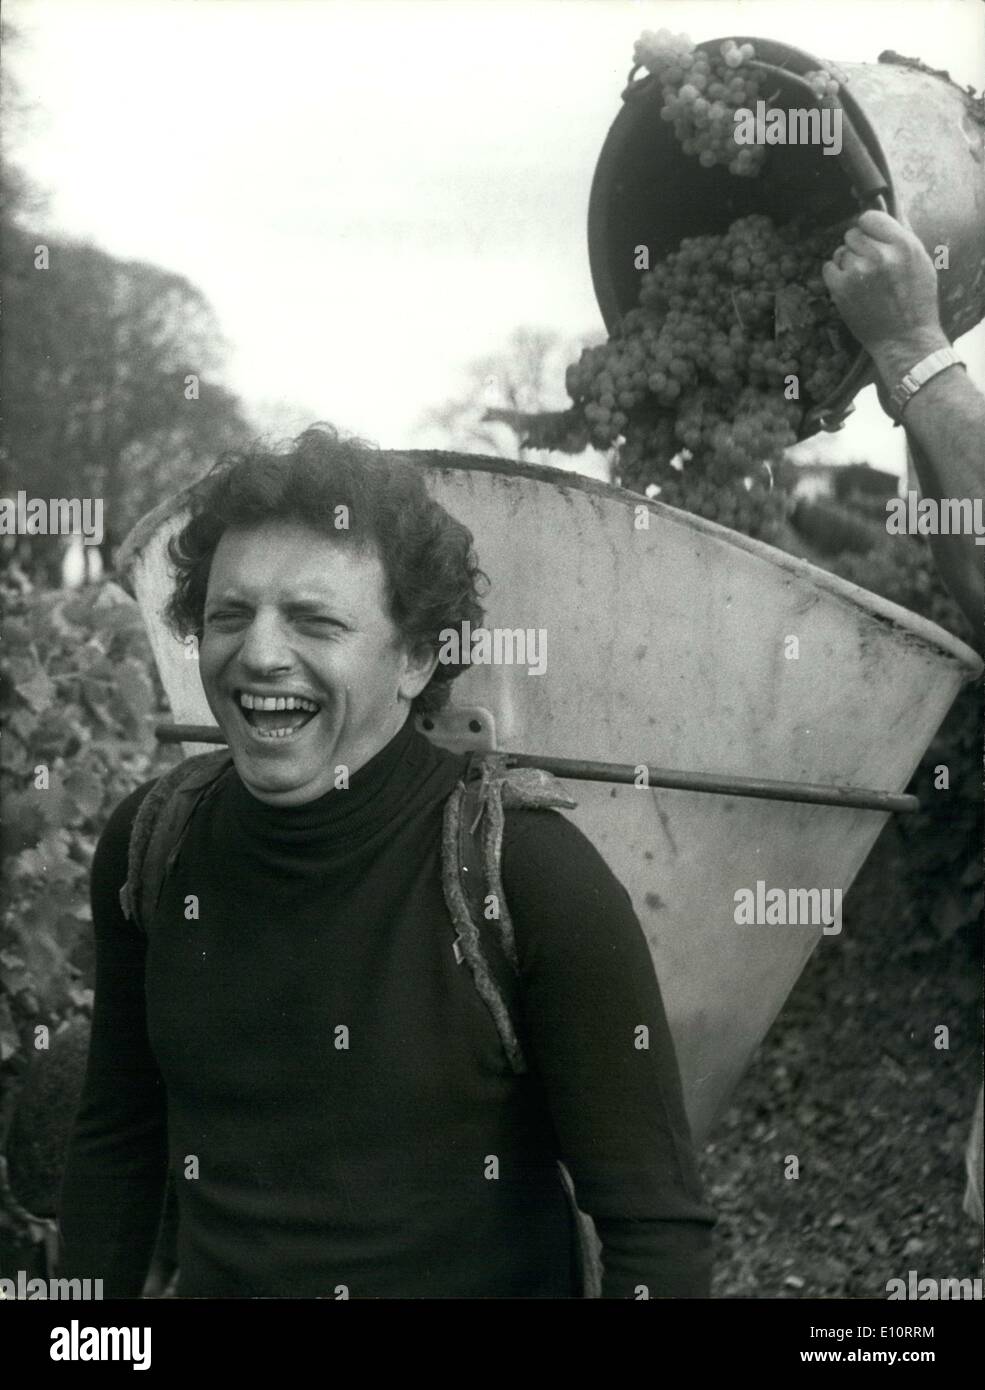 Oct. 24, 1973 - Jacques Martin in the Cognac Vineyards to Pick Grapes Stock Photo